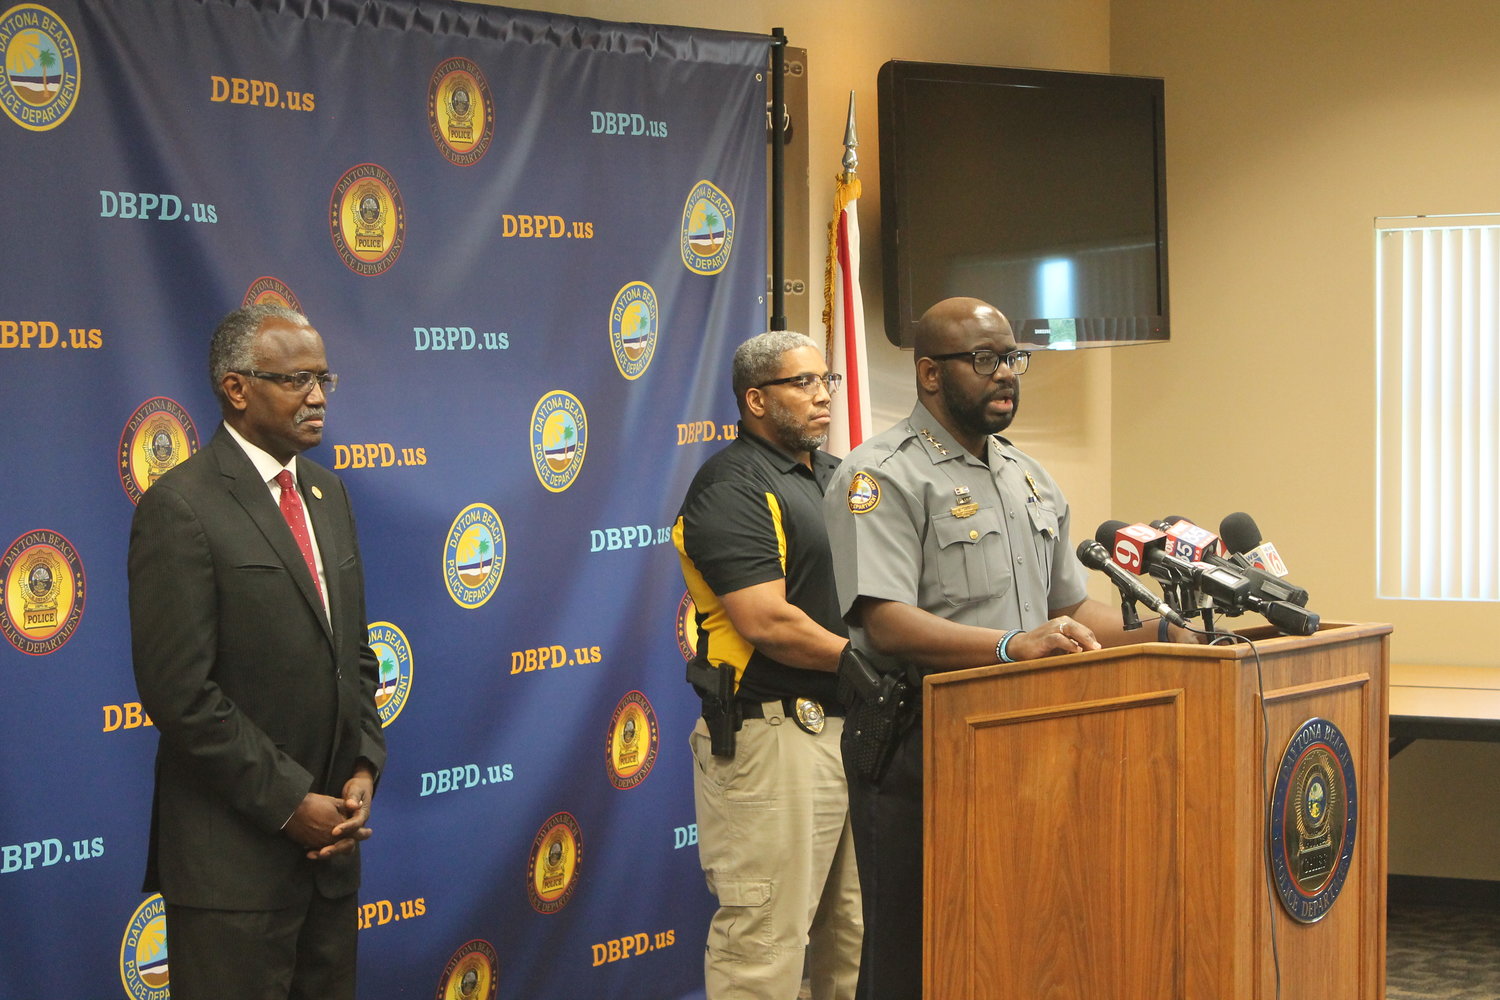 L-R: BCU President Hiram Powell, BCU Safety Director Gary Price, and DBPD Chief Jakari Young.